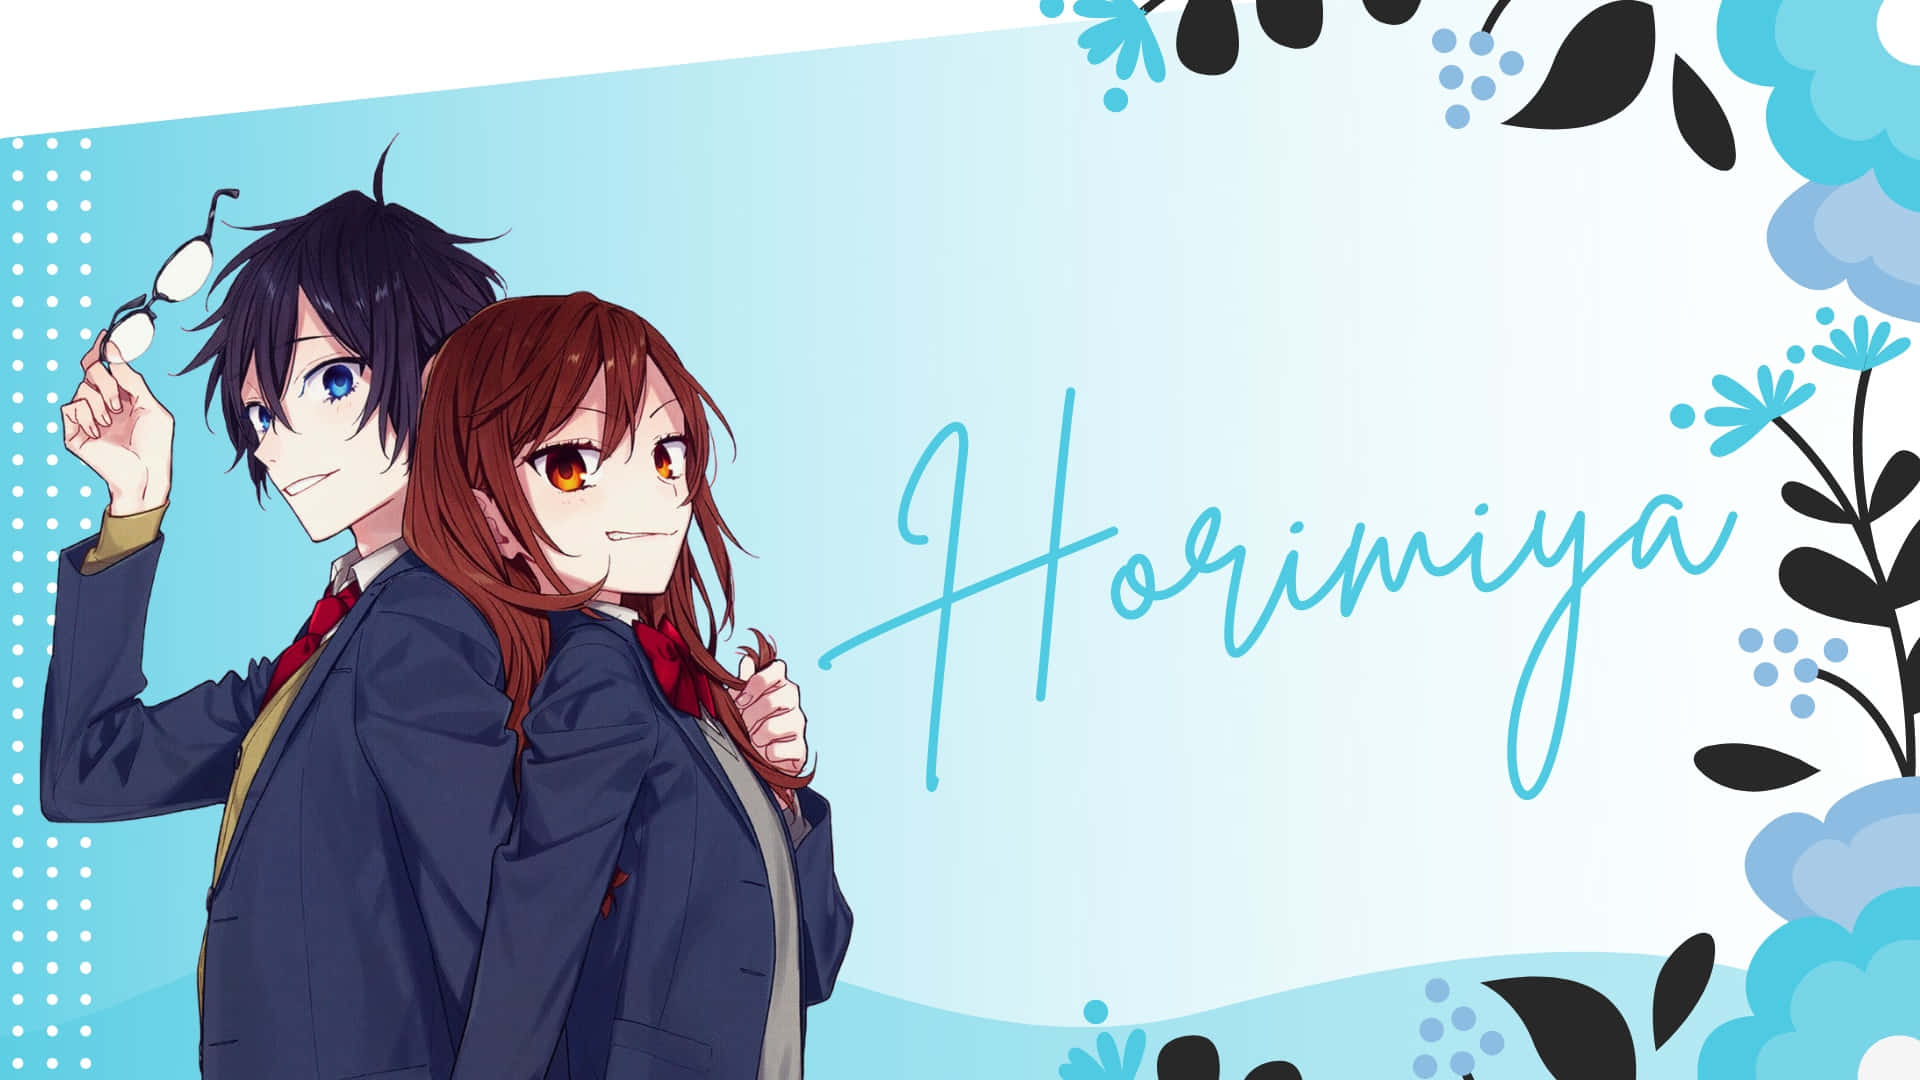 "Find love that stands the test of time with Horimiya"